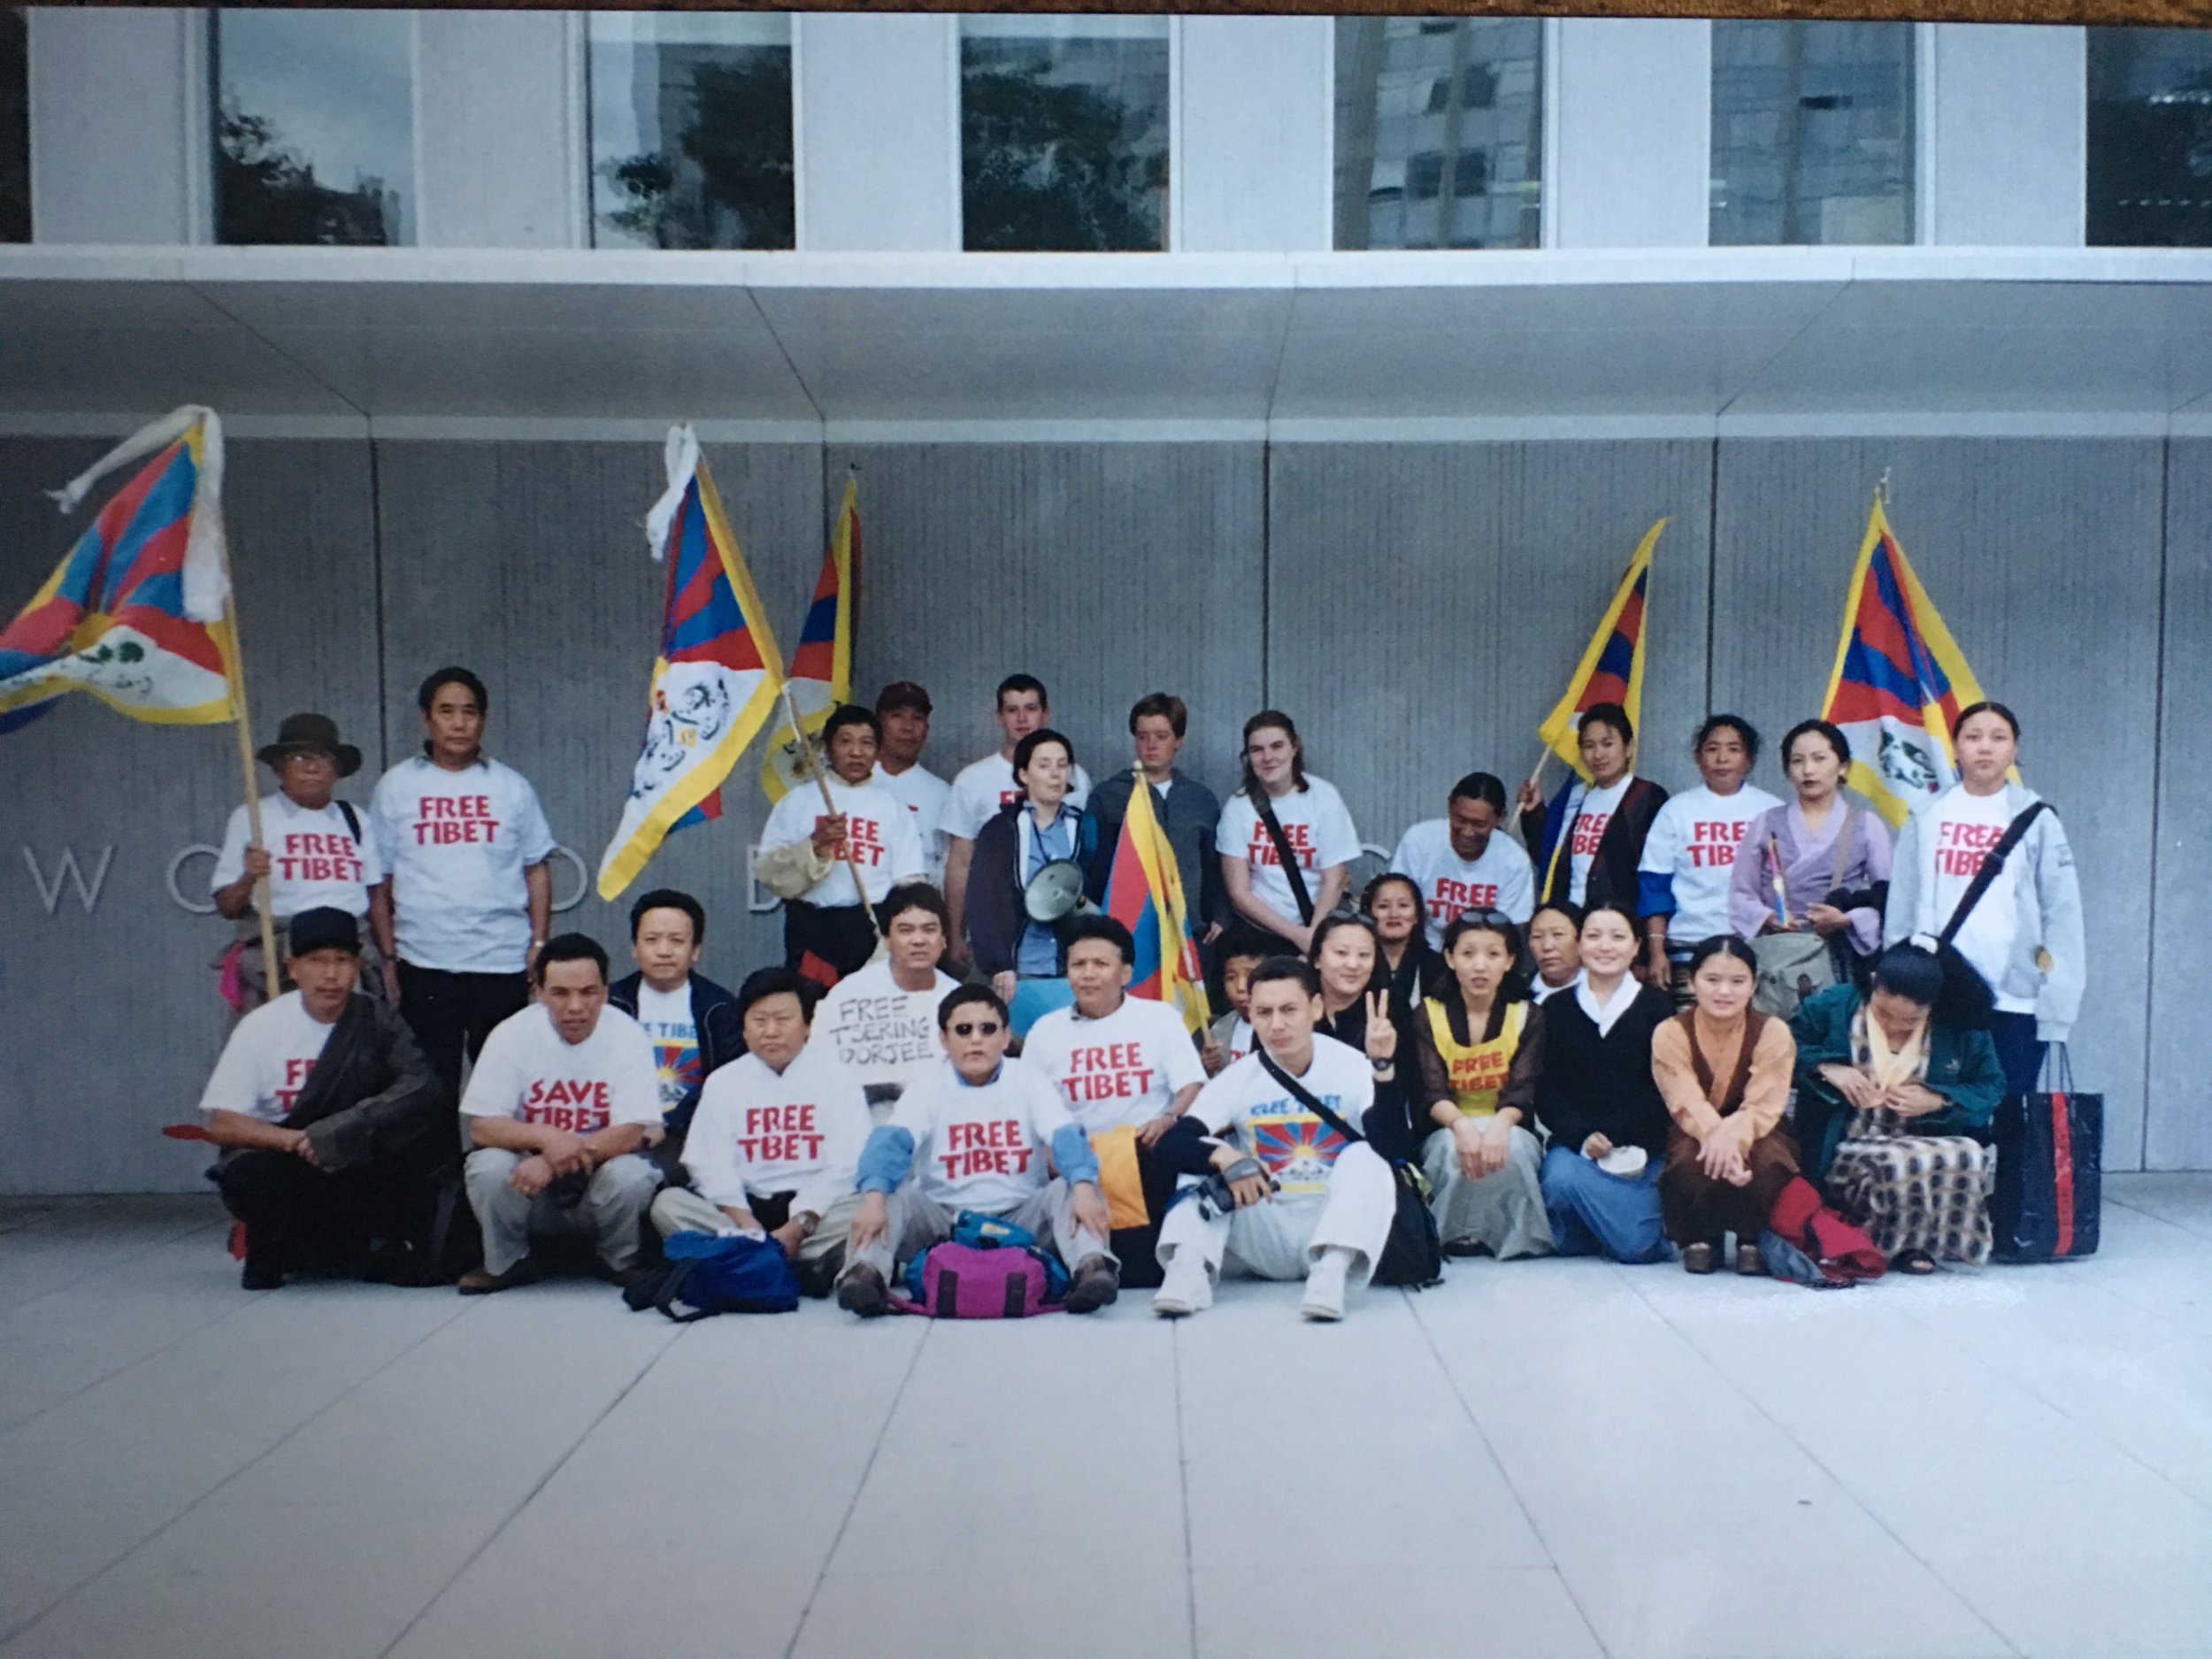 Boston Tibetan Community Freedom fighters back in the days